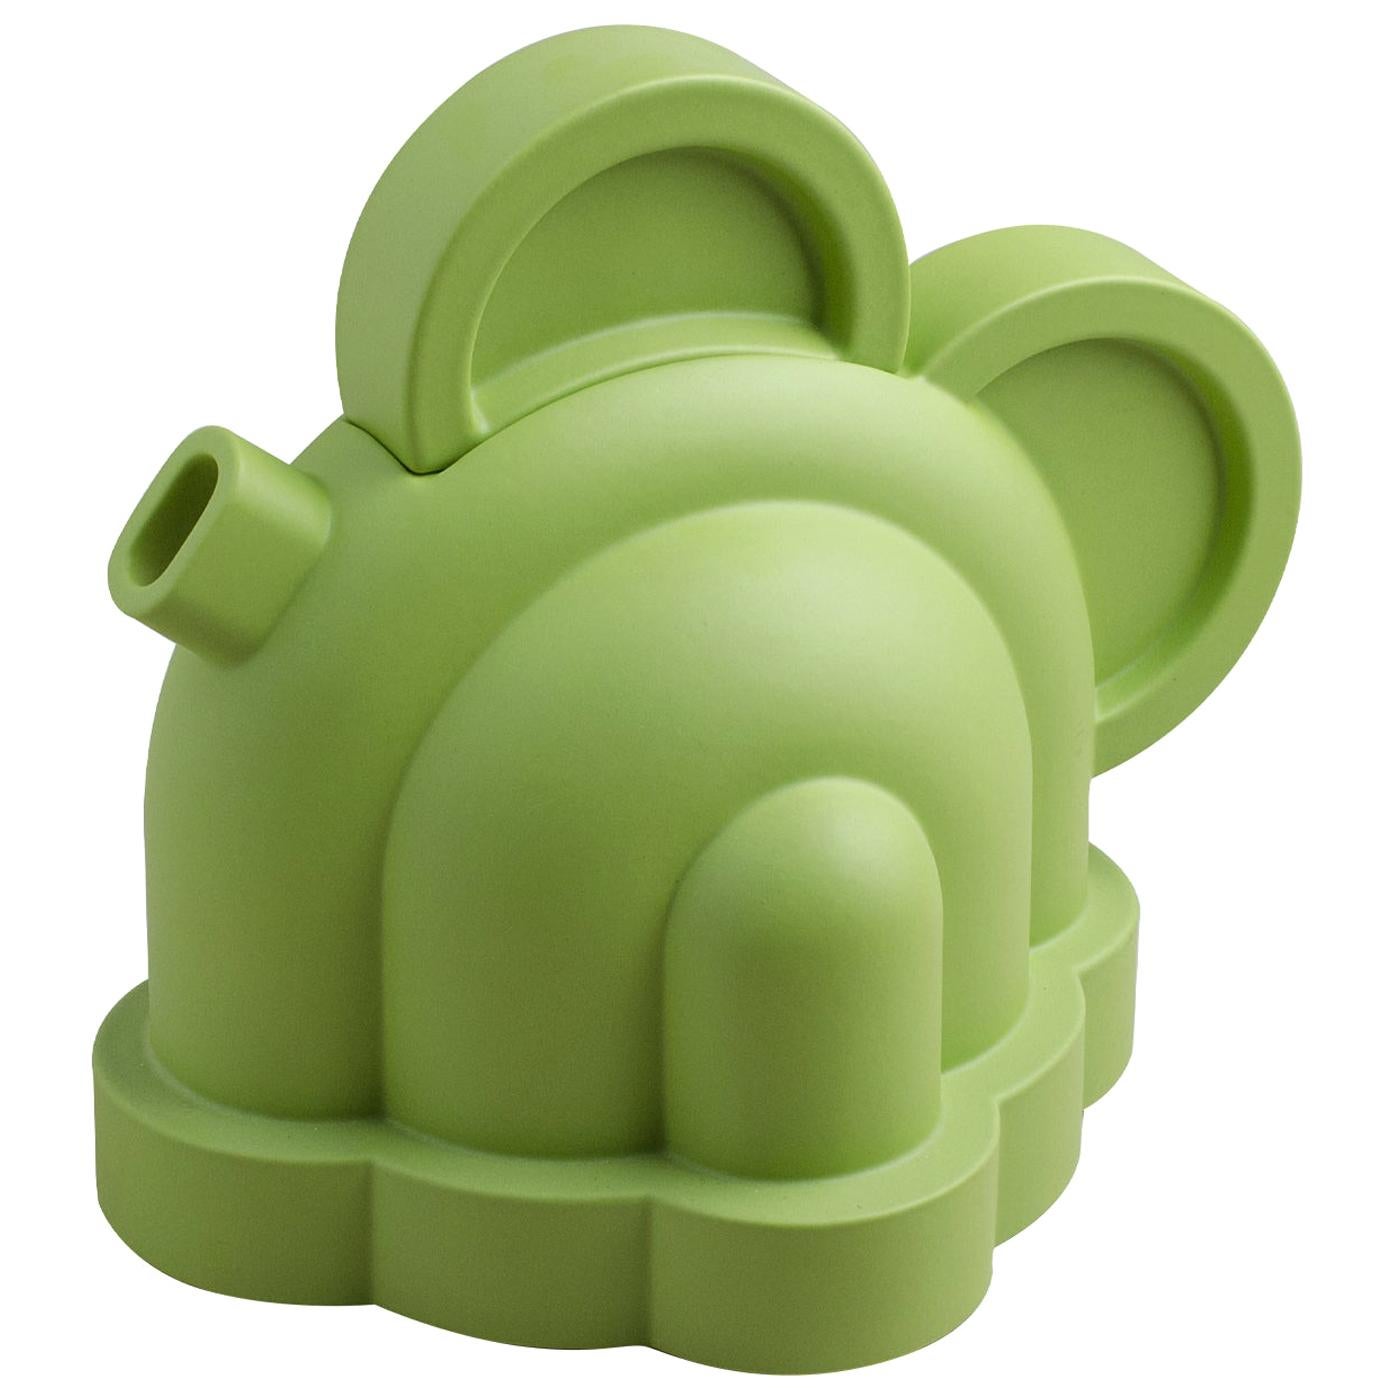 Basilico Teapot by Ettore Sottsass